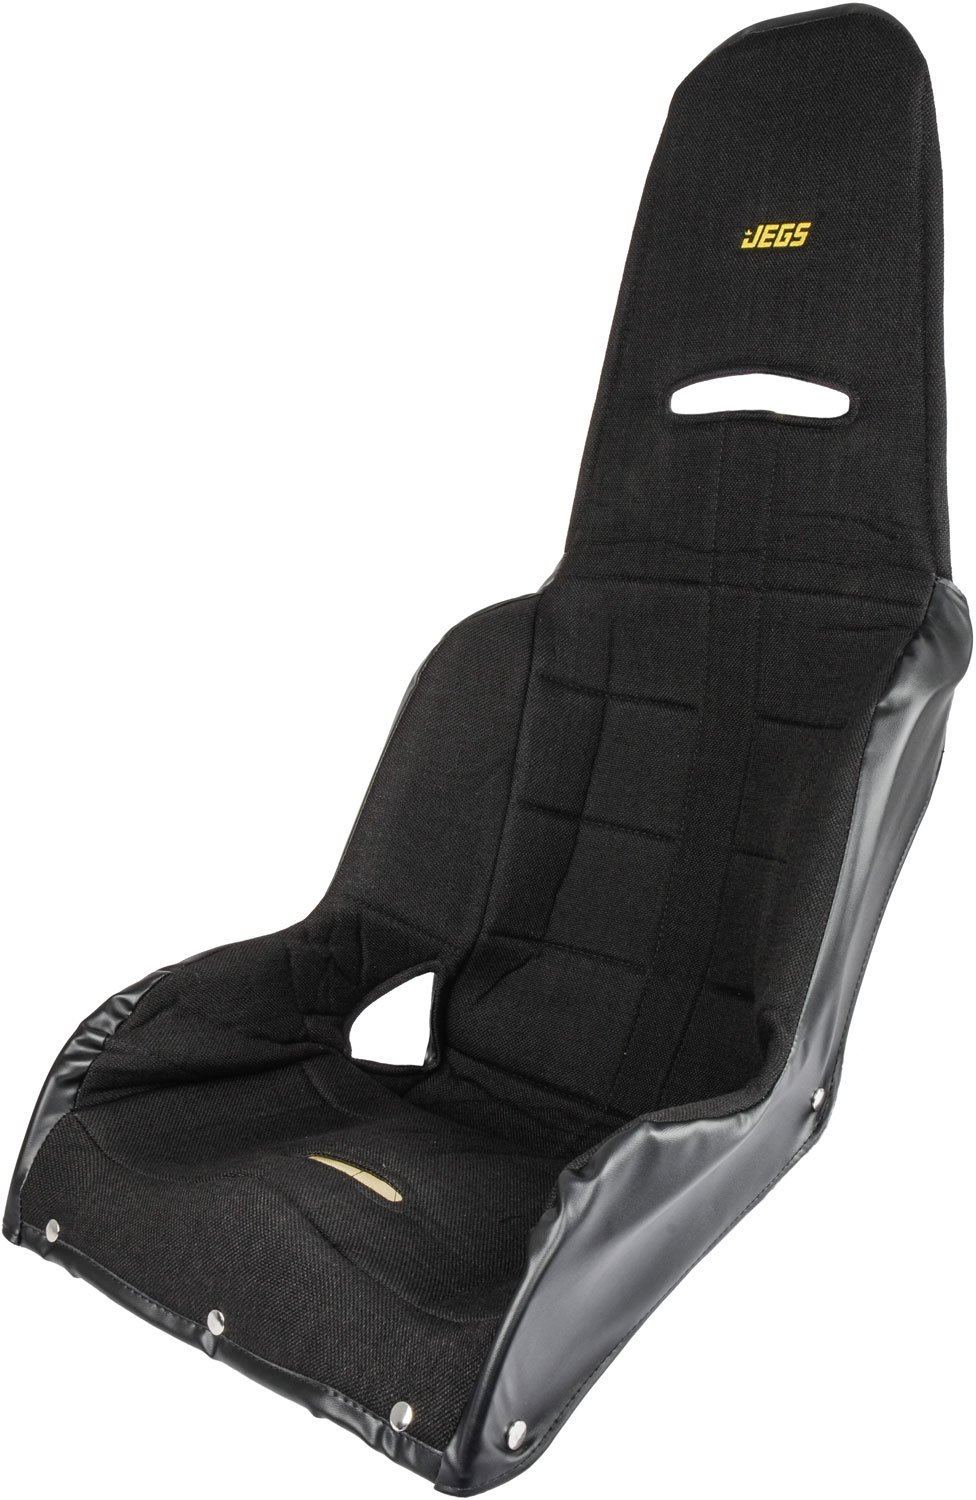 Racing Seat Cover 17